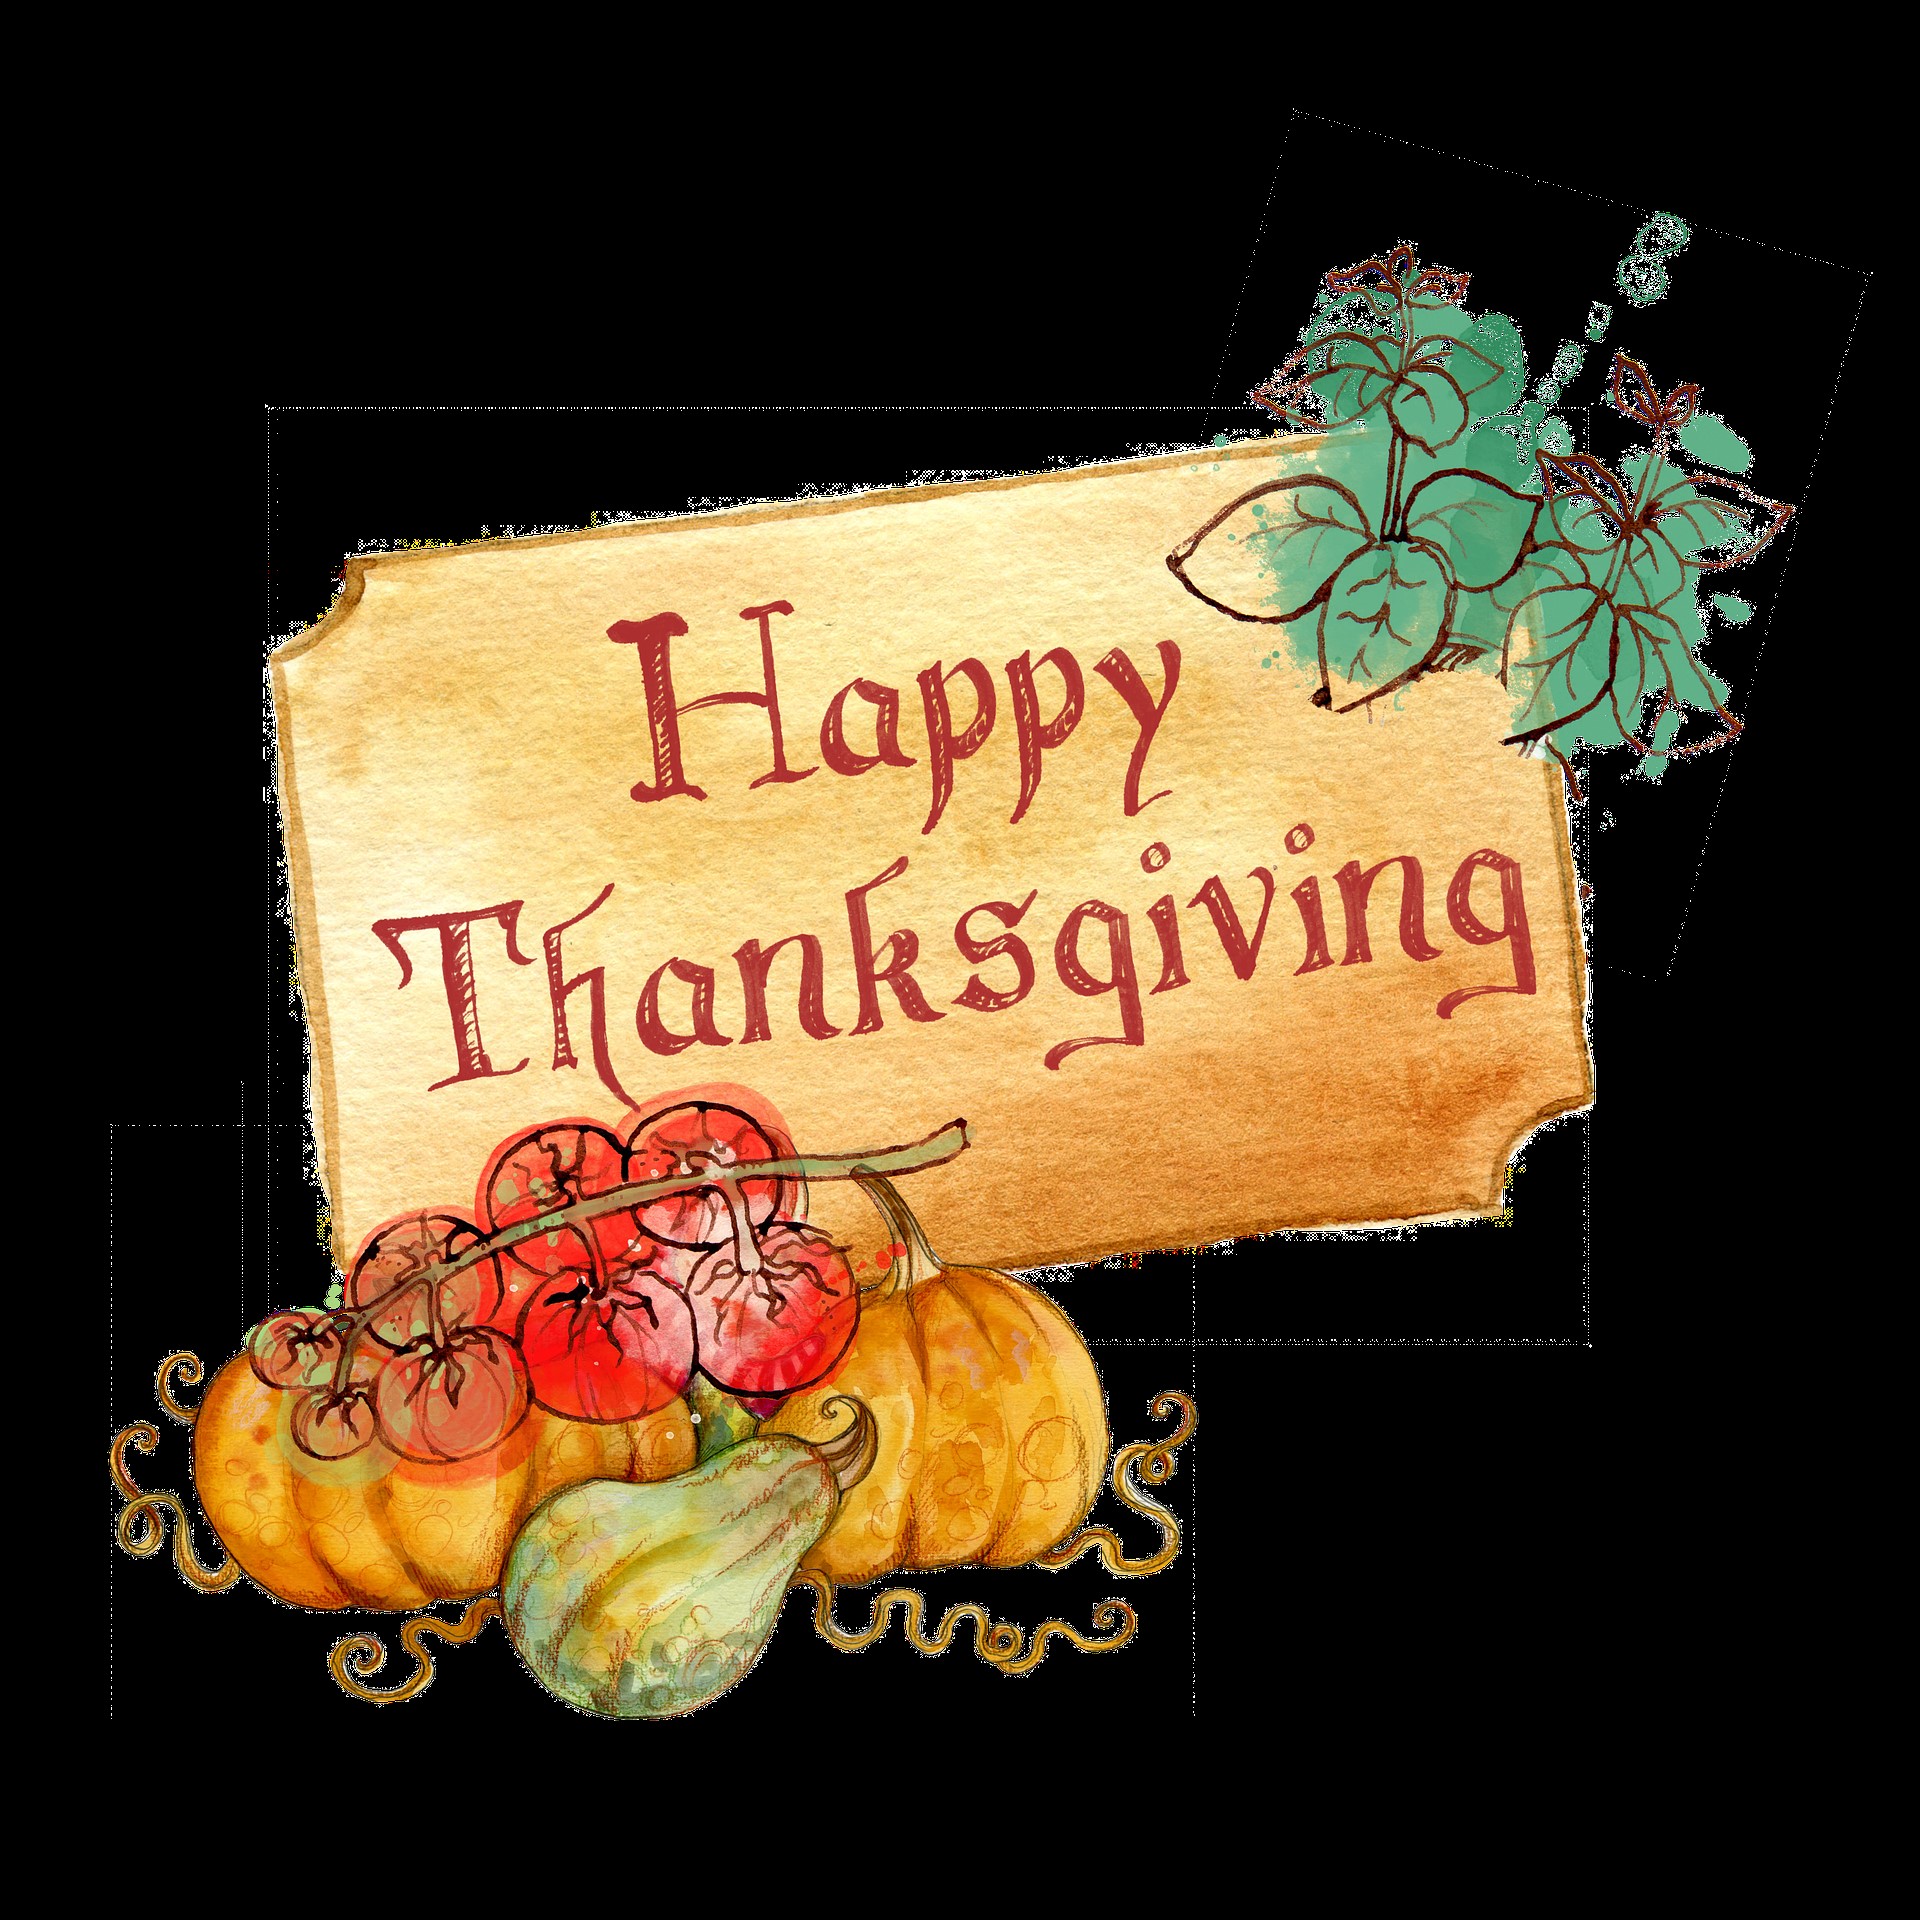 Image of Happy Thanksgiving; have pumkins and other vegetables in the corner and leaf in the other corner with a sign that says "Happy Thanksgiving"